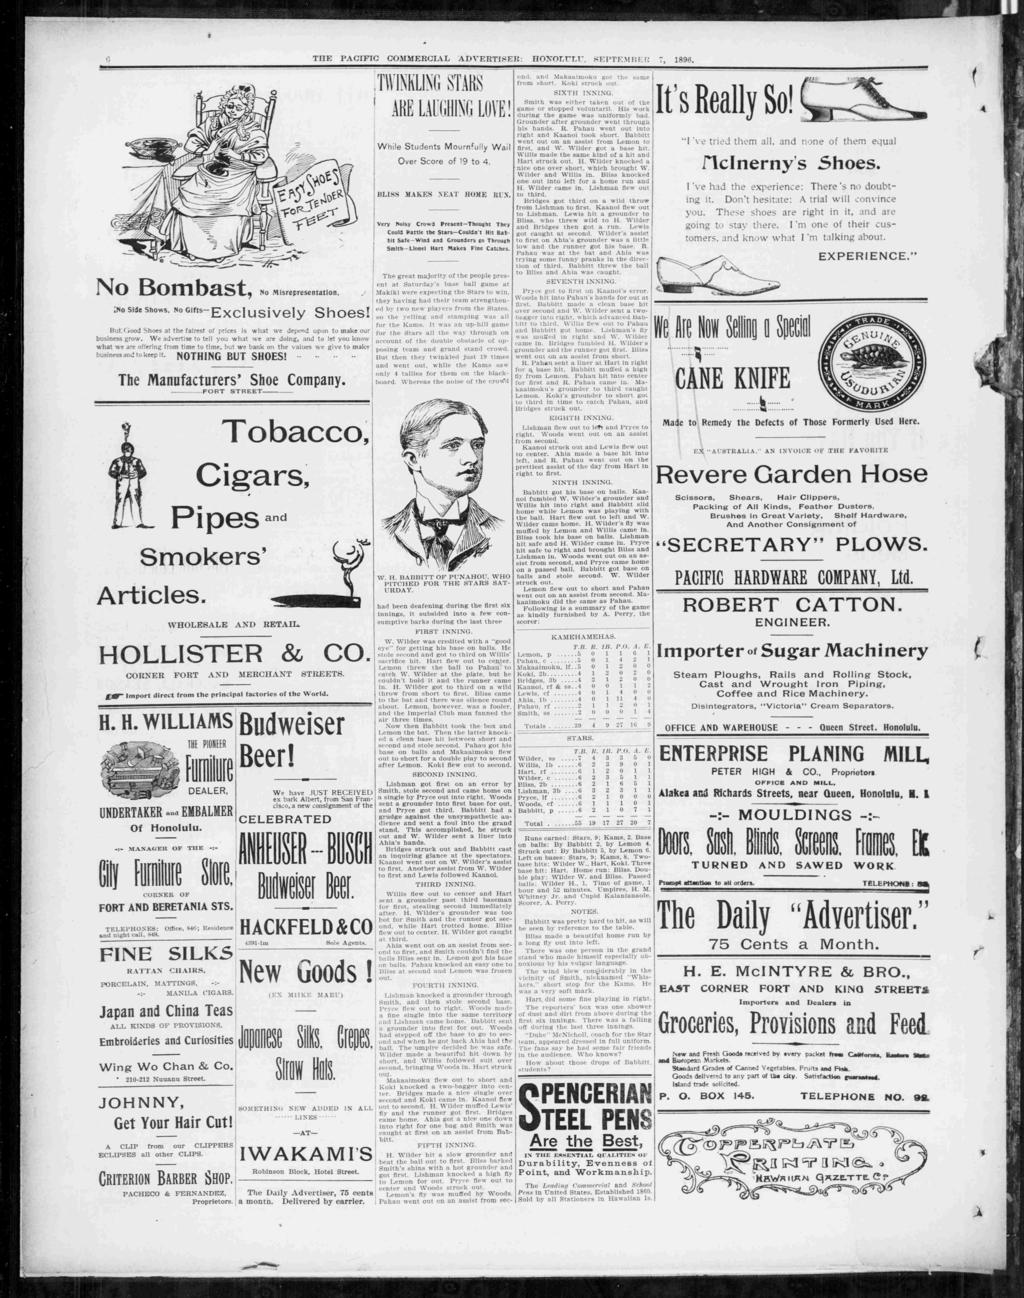 6 THE PACFC COMMERCAL ADVERTSER: HOXOr.n.T. SEPTEMBER 896. No Bombast, No ;n s,ows. Nocms-cUS- vejy Msrepresentaton, shoes! But.